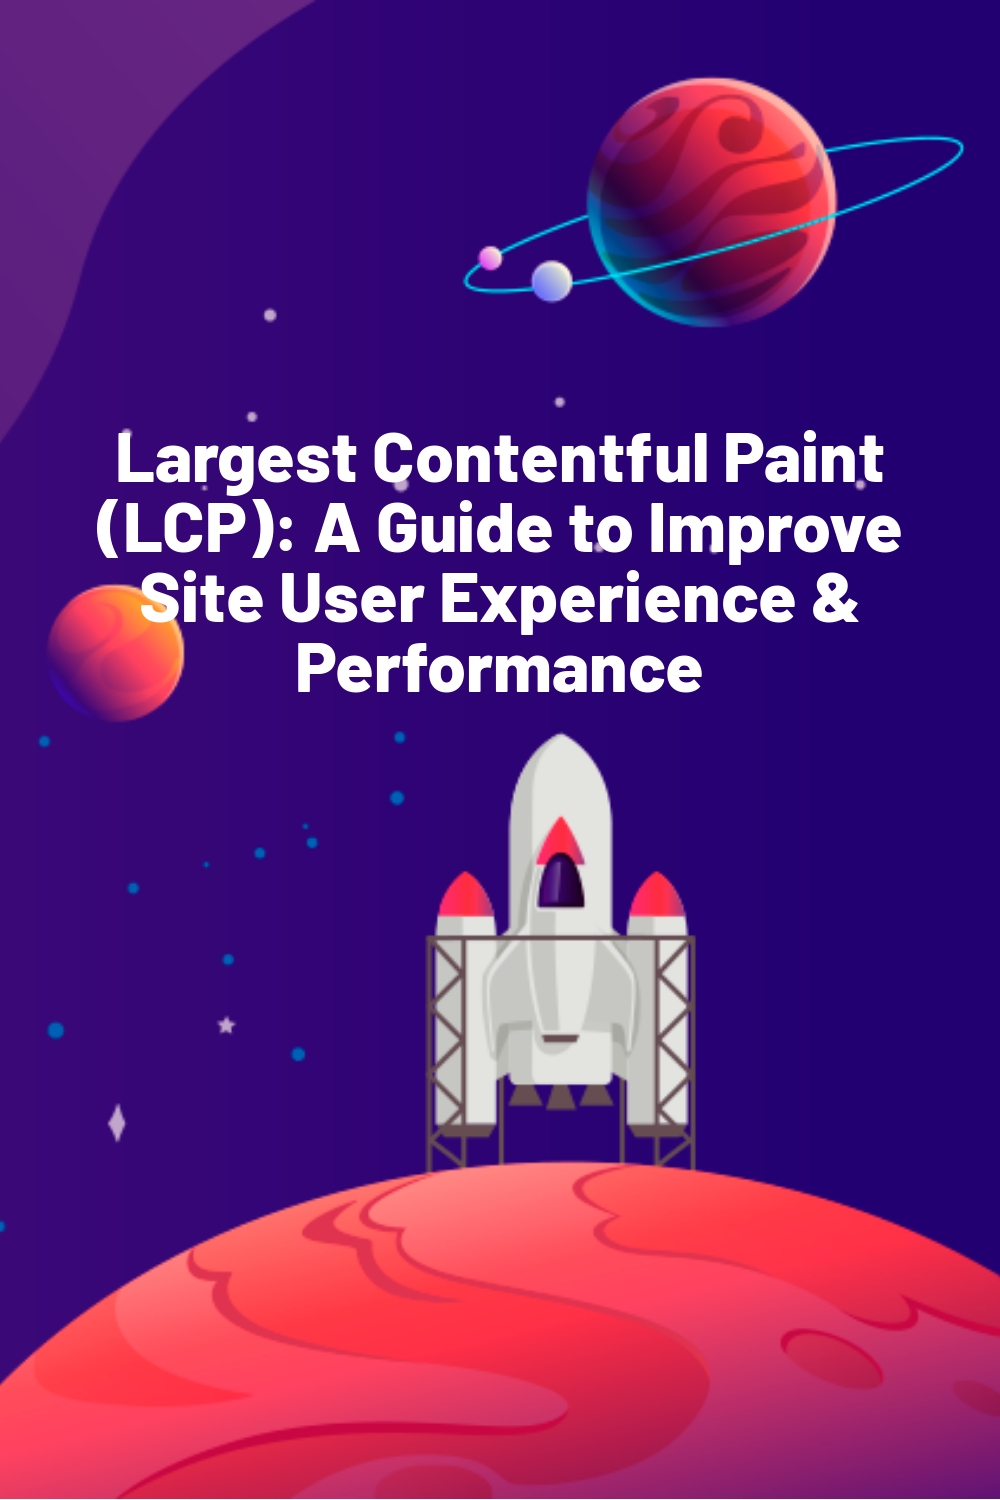 Largest Contentful Paint (LCP): A Guide to Improve Site User Experience & Performance